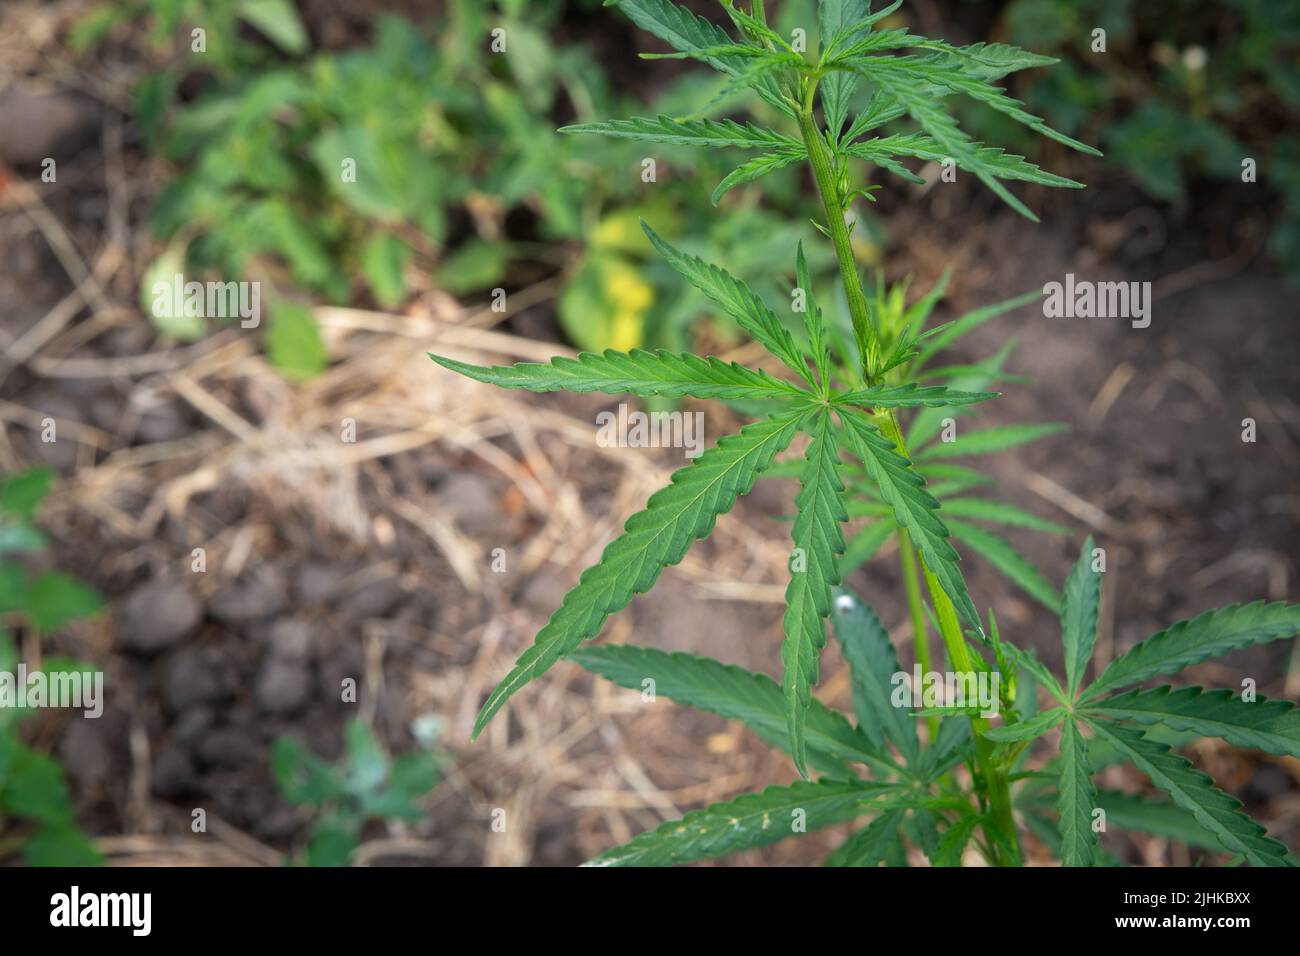 young green cannabis bush growing outdoors in nature Stock Photo